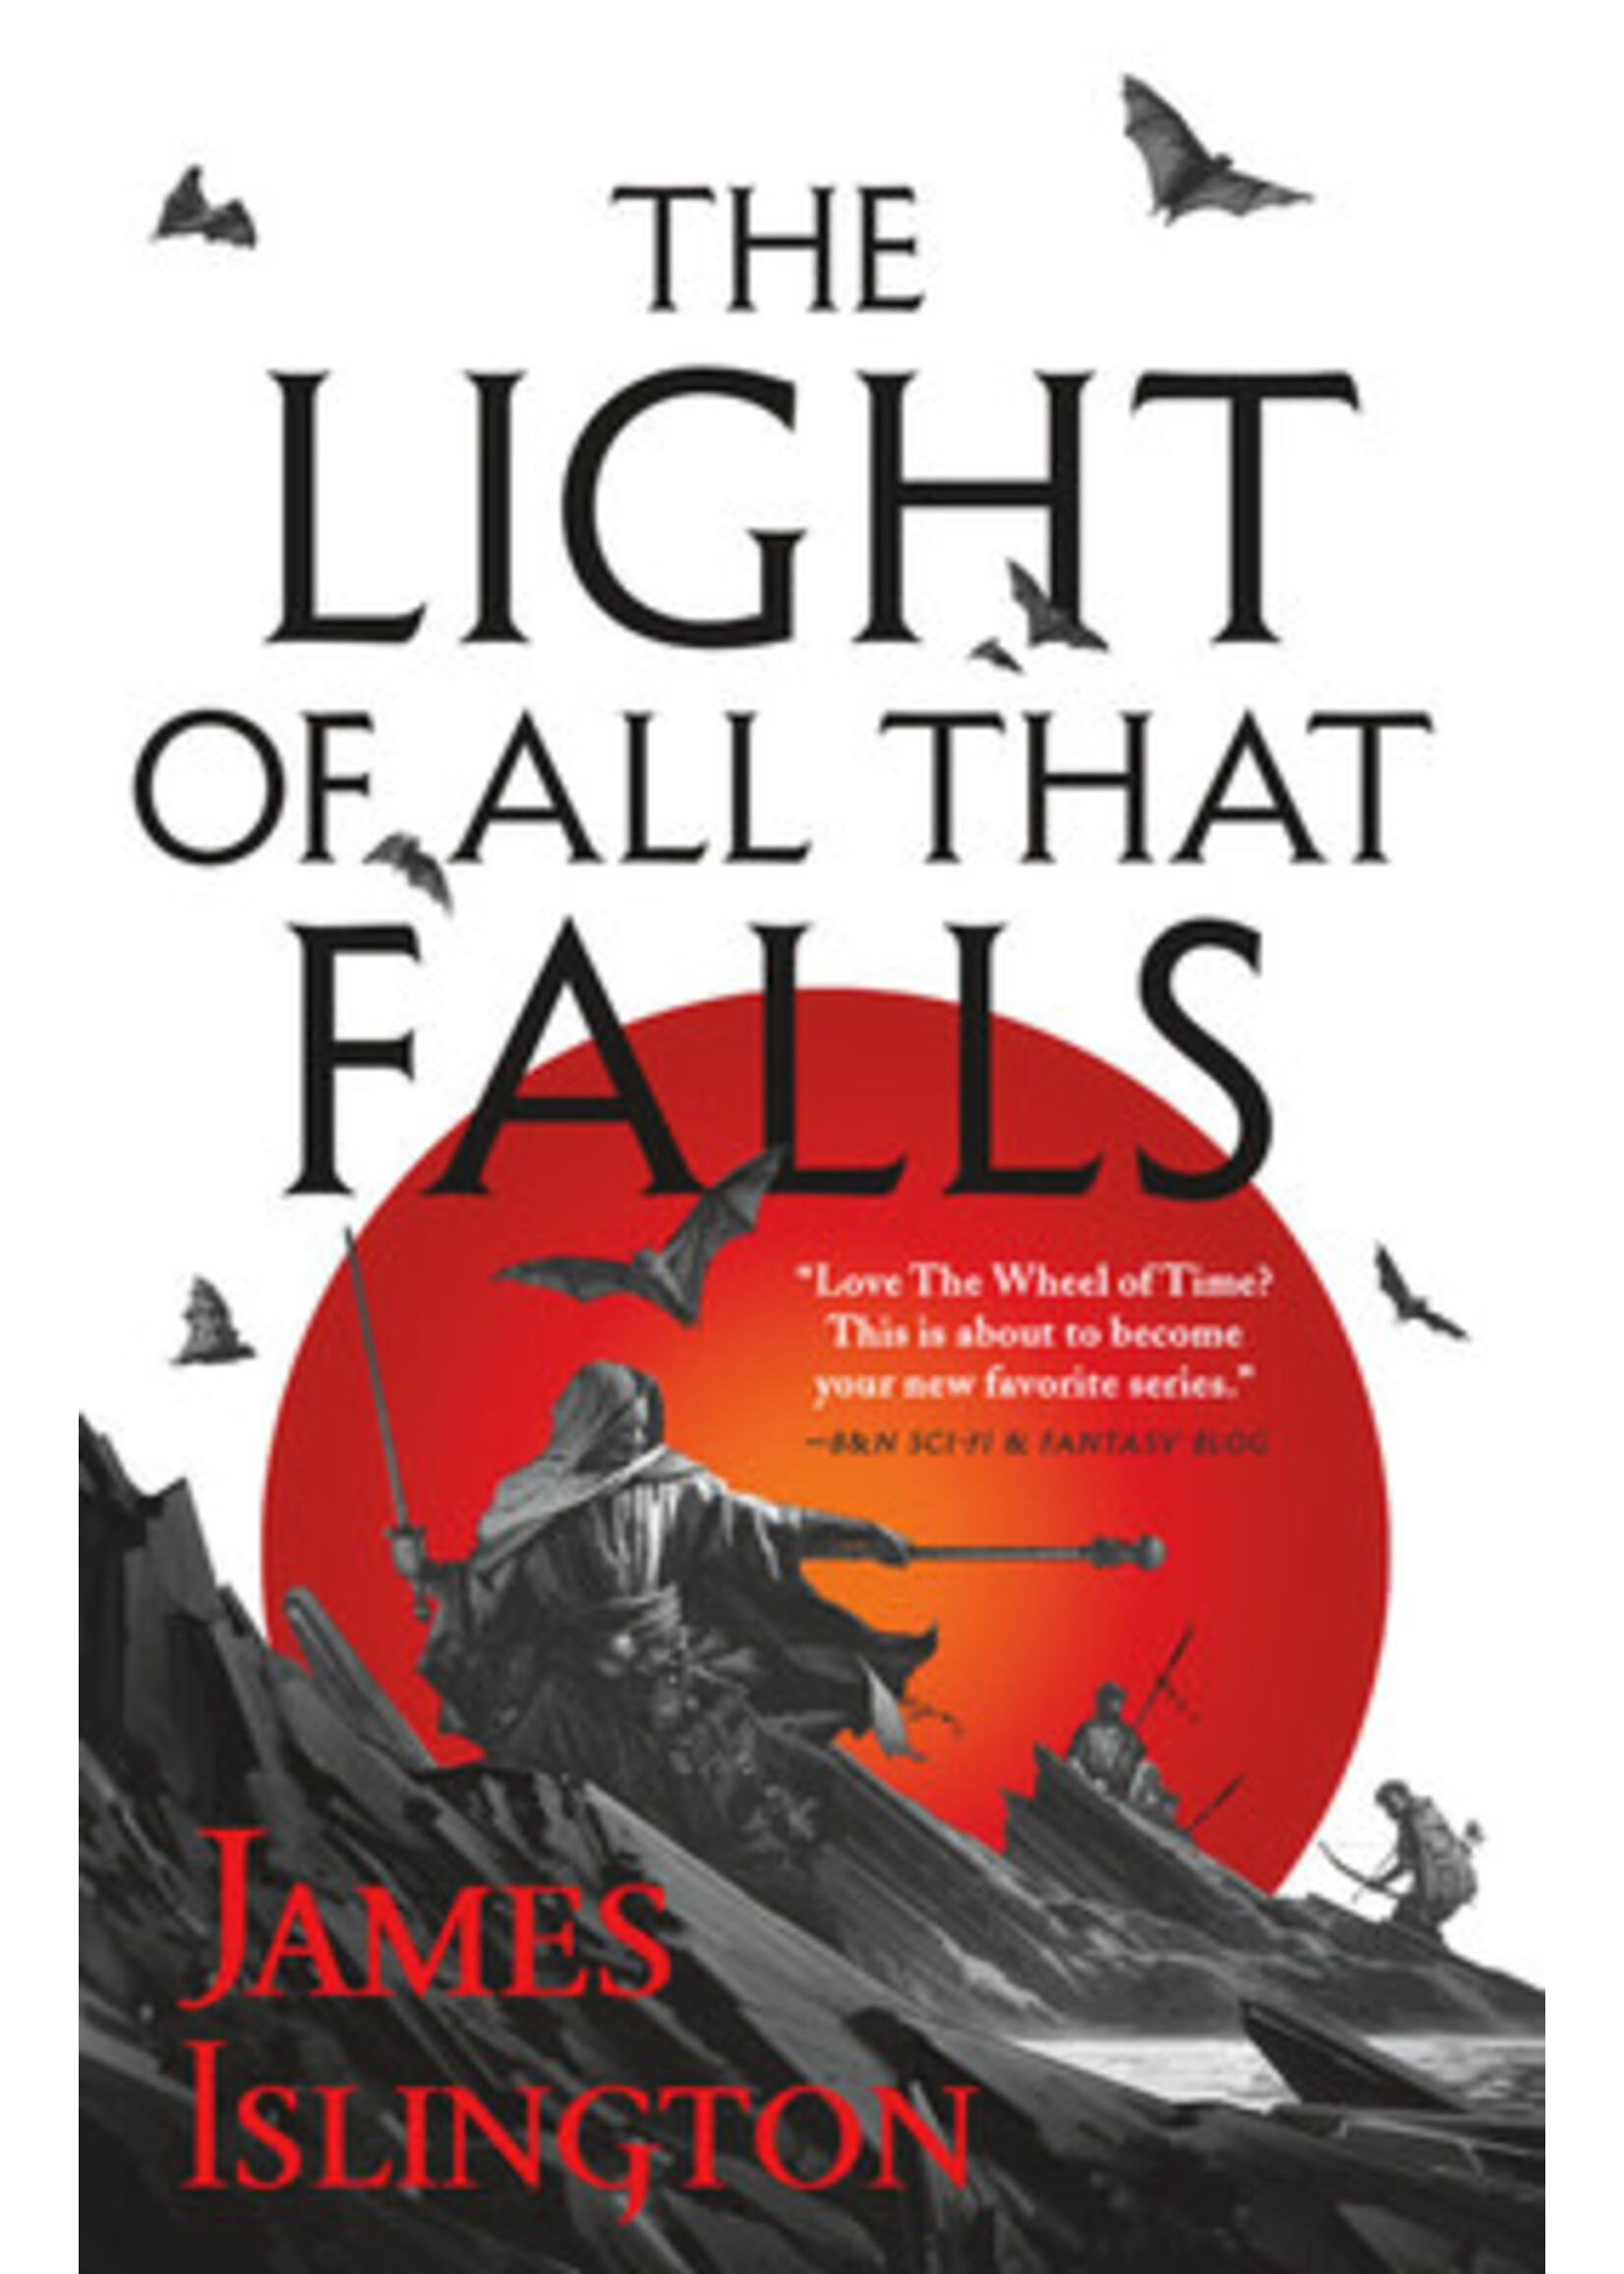 The Light of All That Falls (The Licanius Trilogy #3) by James Islington